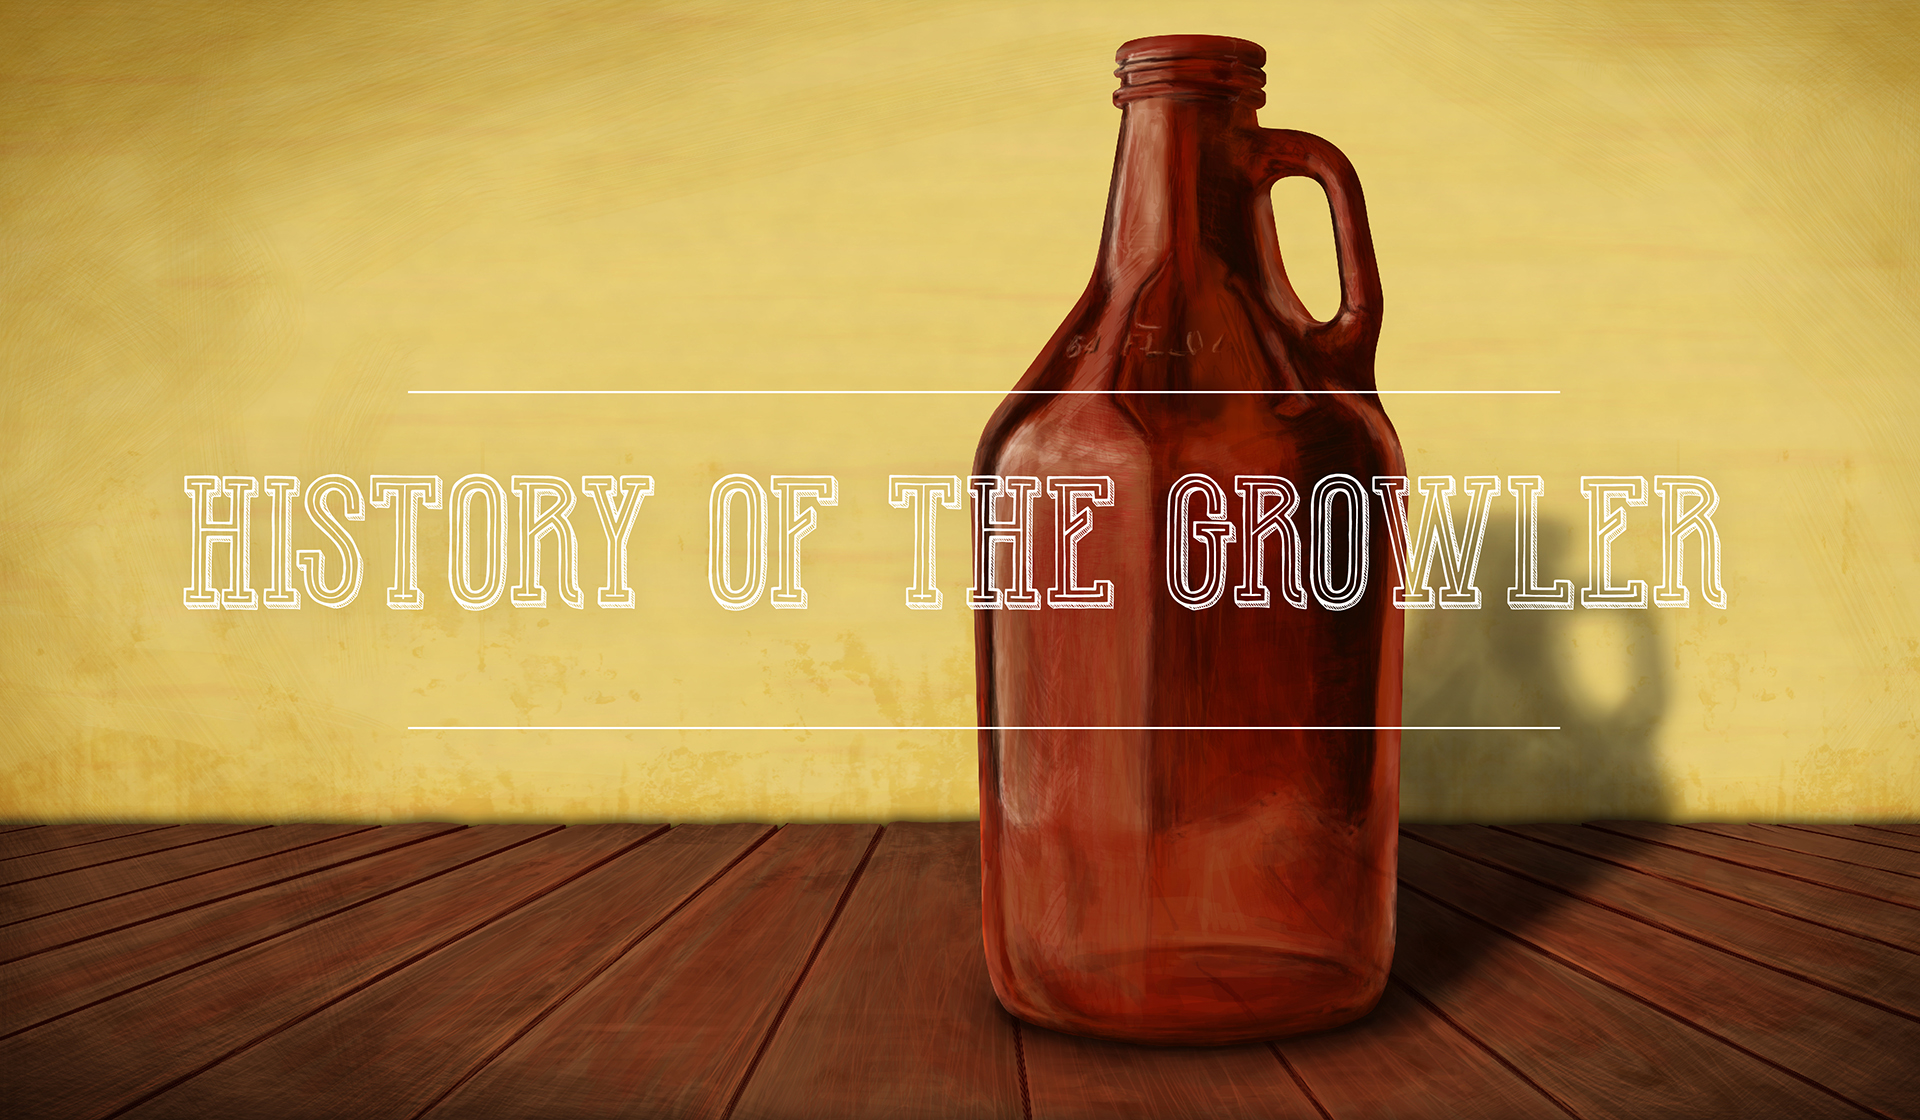 History of the Growler